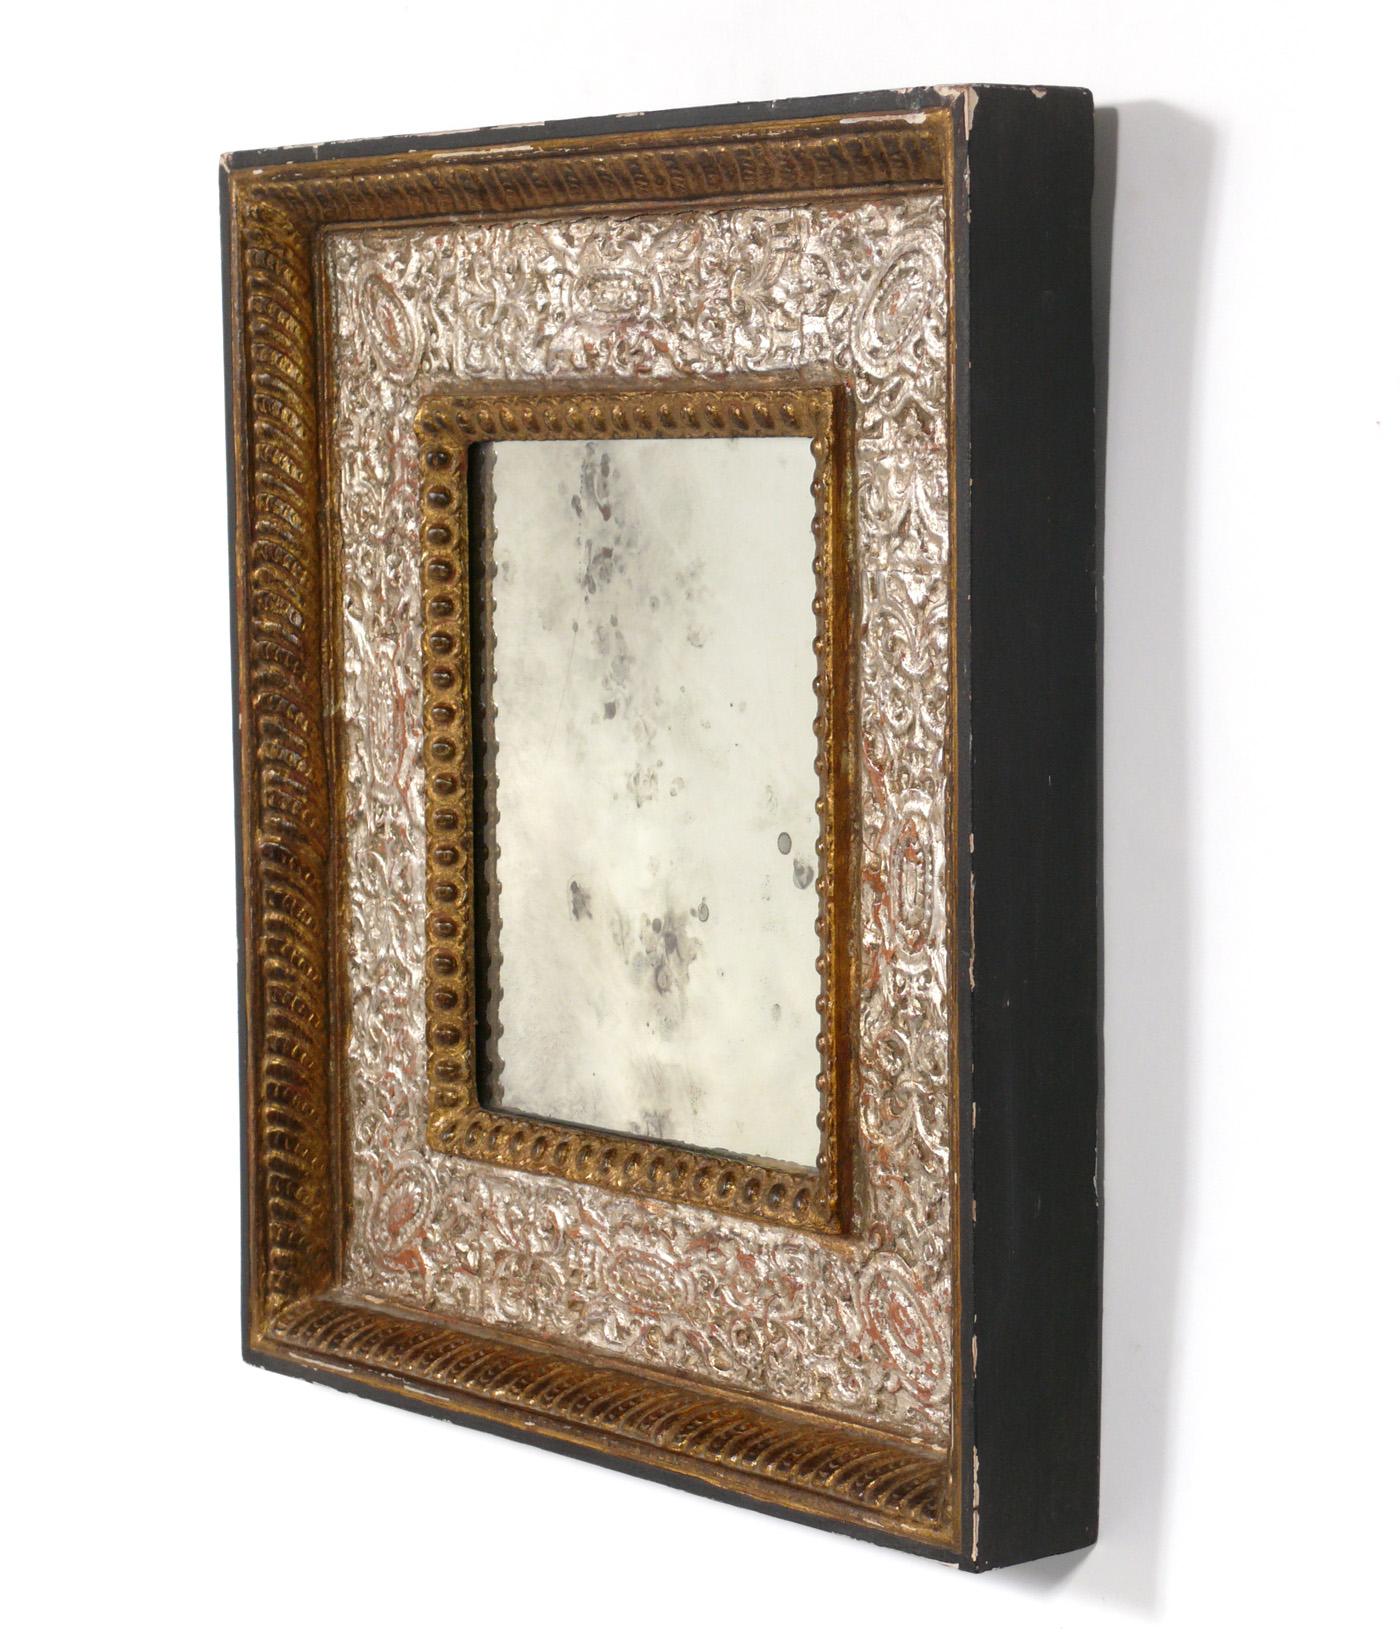 Hollywood Regency Selection of Petite Mirrors